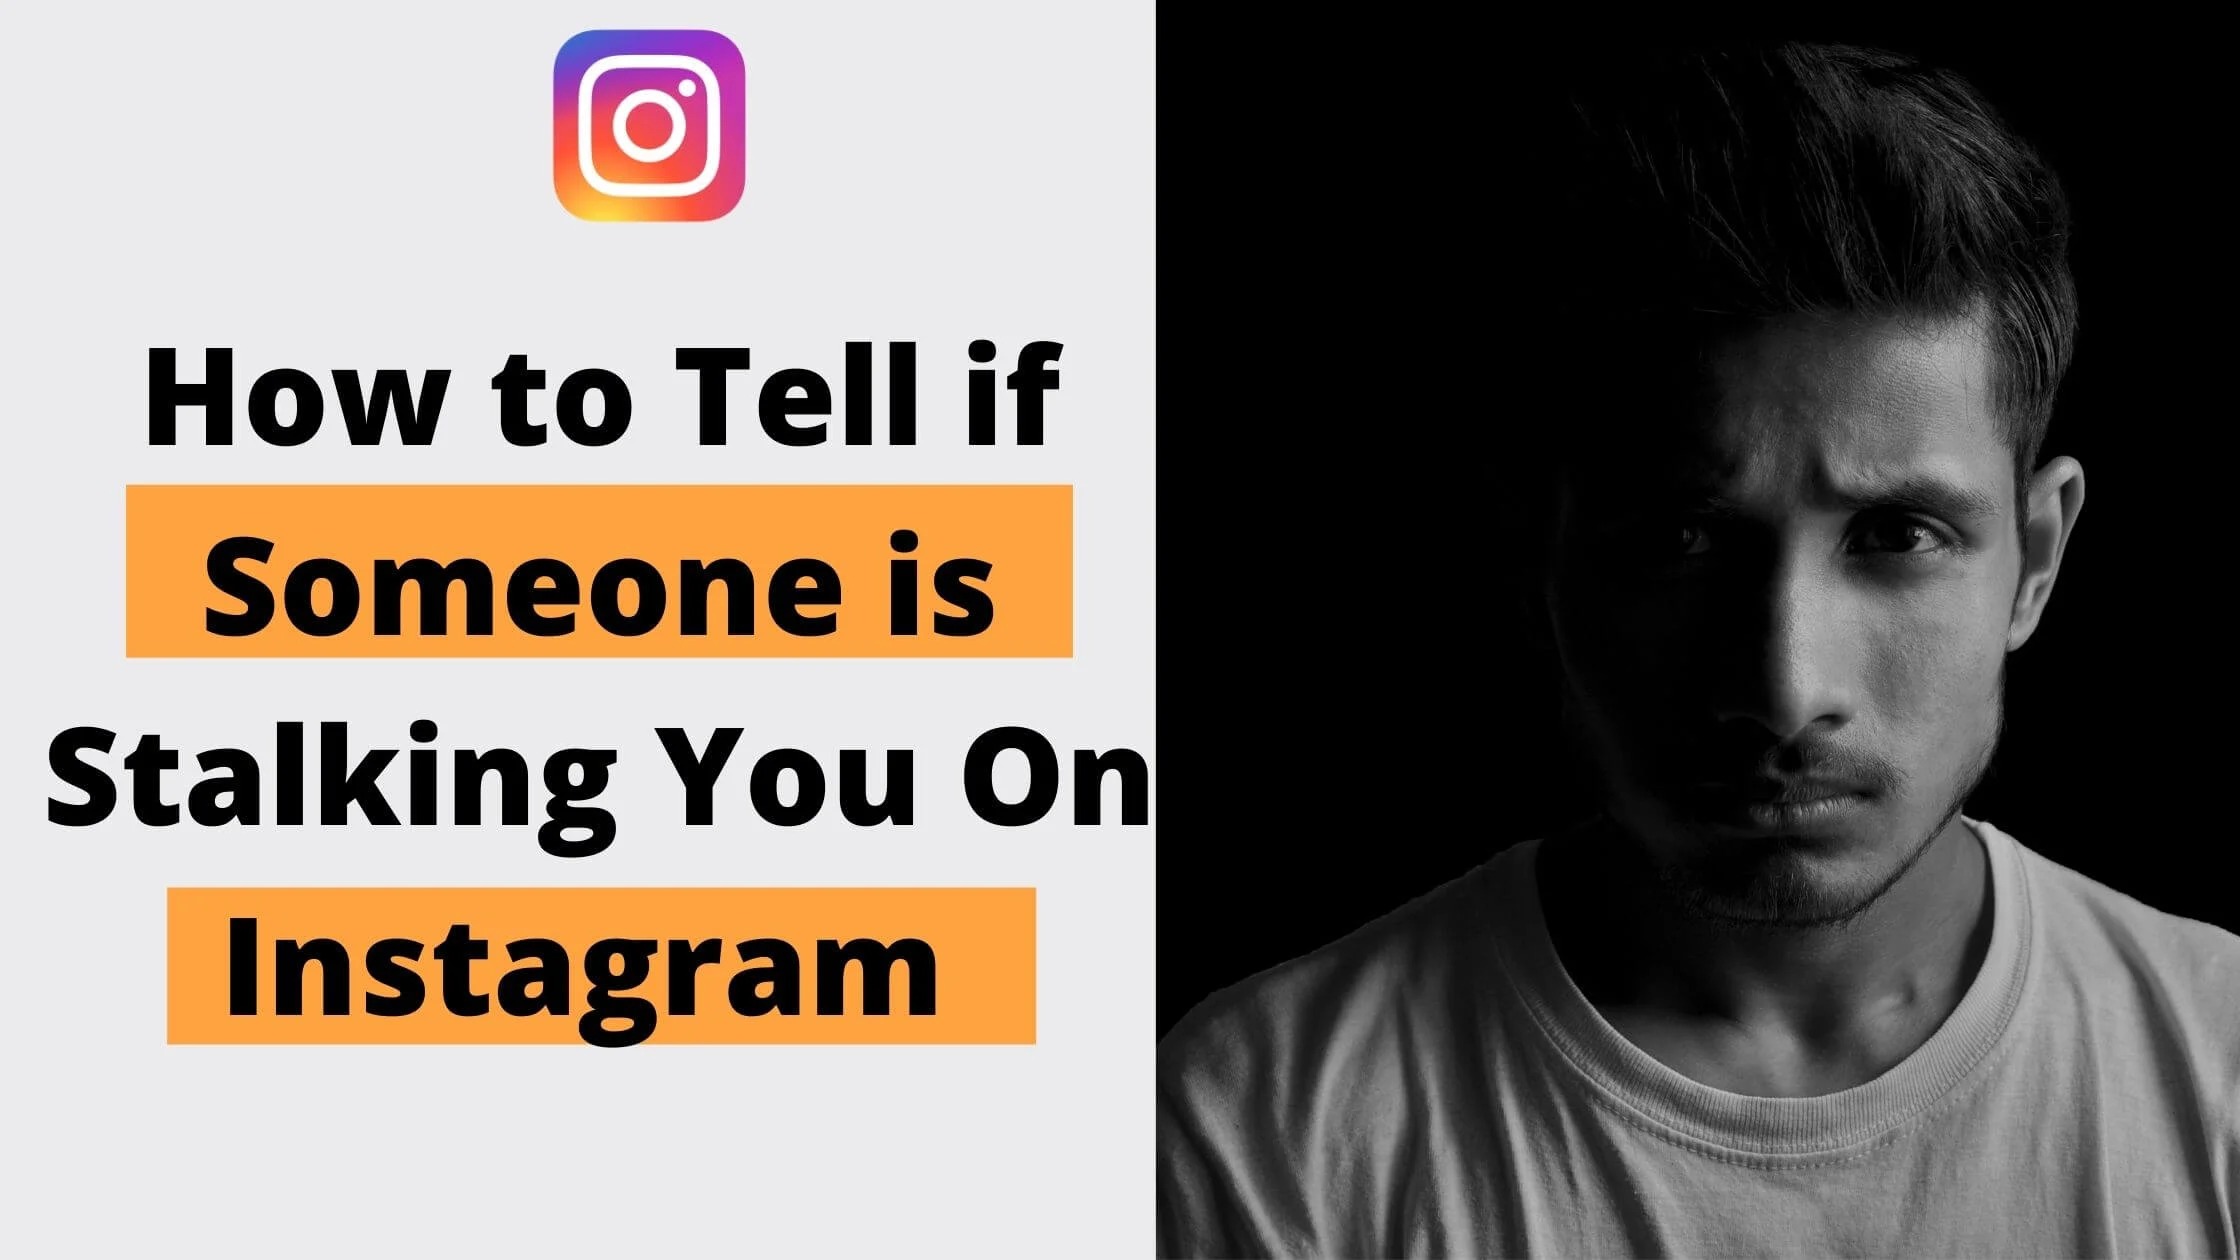 How to Tell if Someone is Stalking You On Instagram